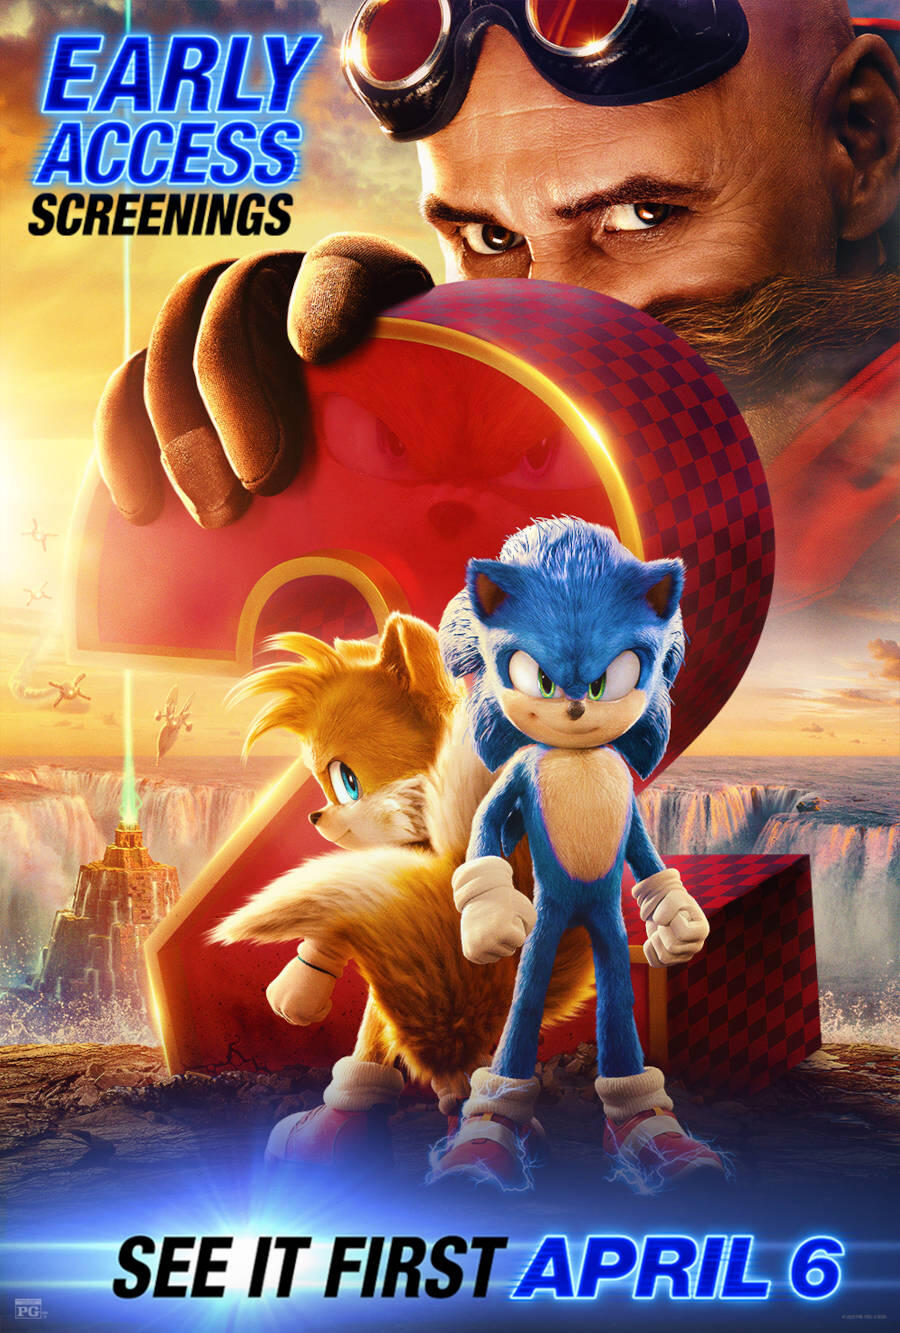 SEGAbits.com 💥 SEGA News on X: Based on data from the first two Sonic  movie posters, we asked an AI what a Sonic 3 poster would look like and  this is the